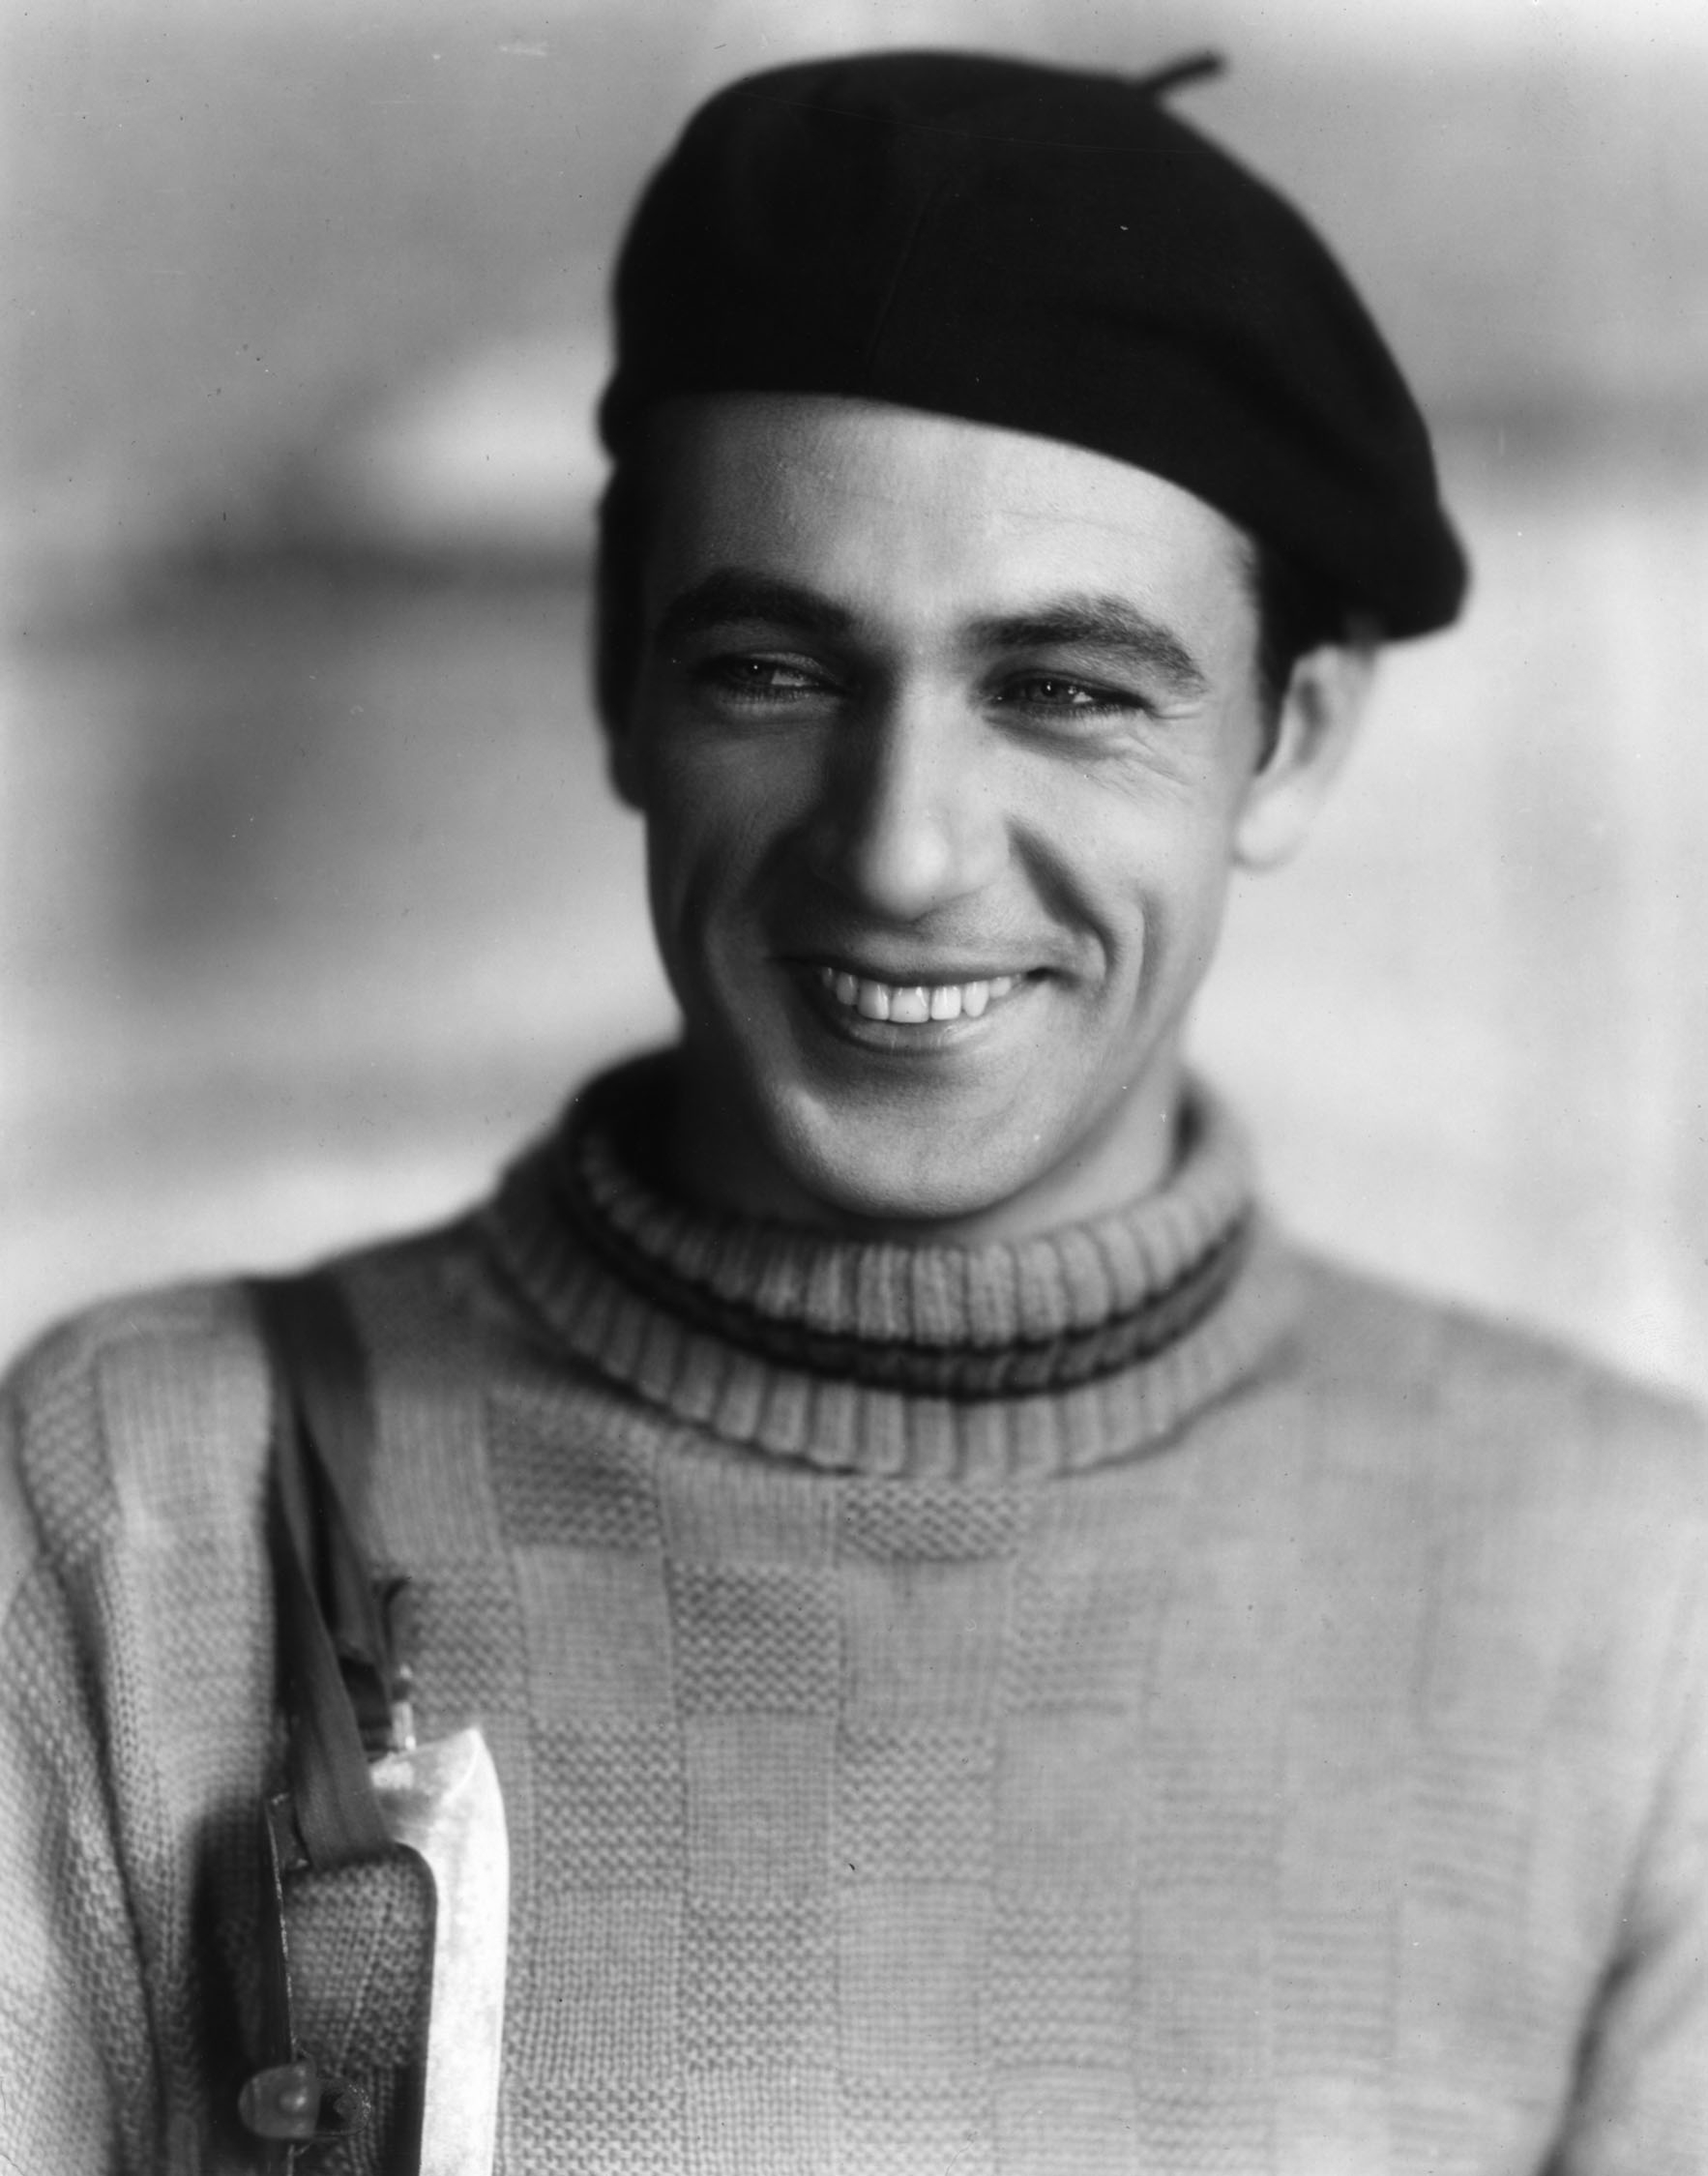 Gary Cooper, circa 1928, photographed by Eugene Robert Richee.